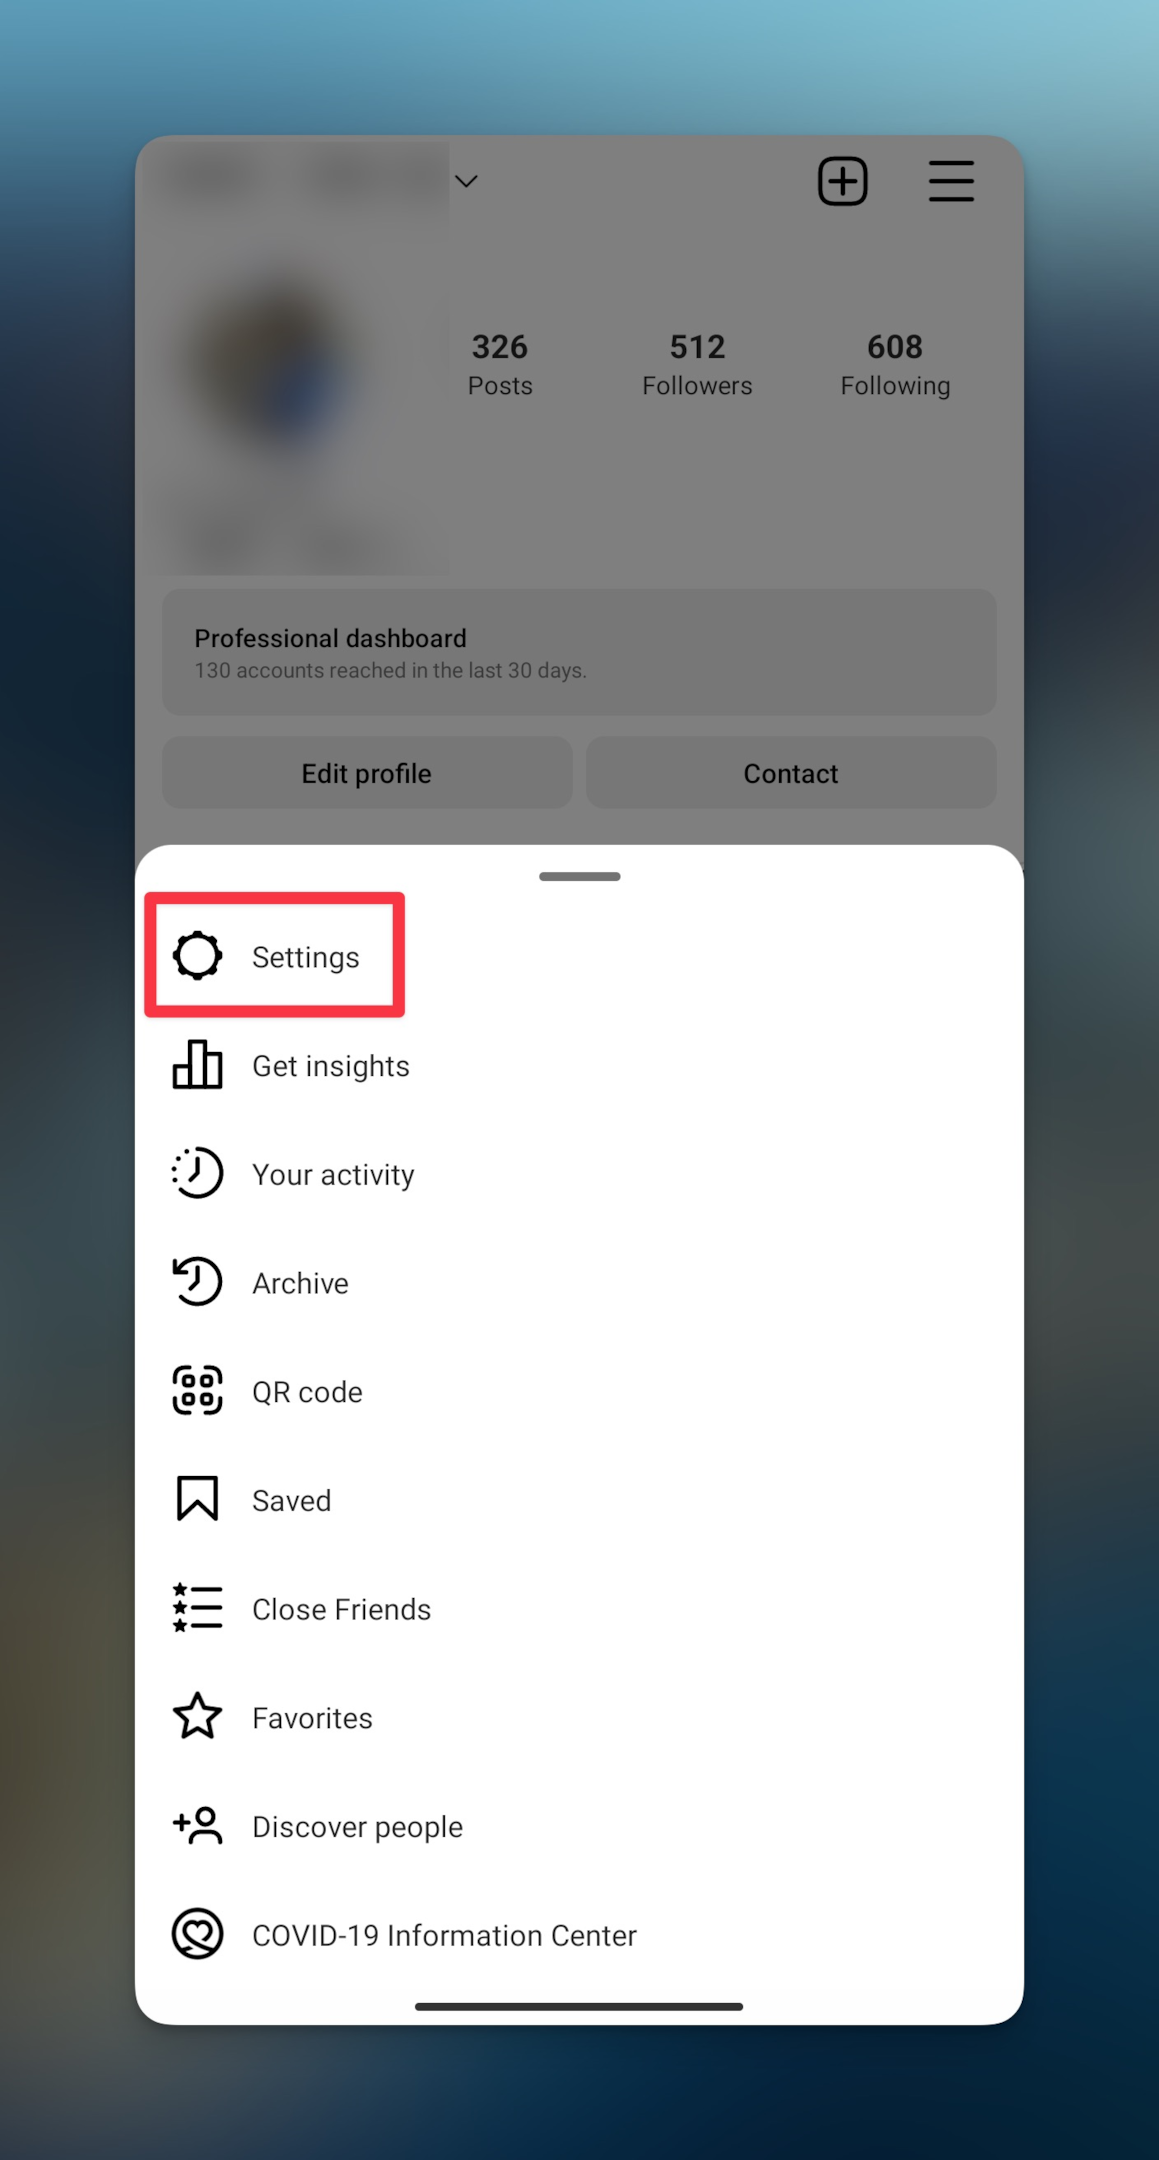 Remote.tools highlighting Settings page on Instagram profile to setup messaging privacy